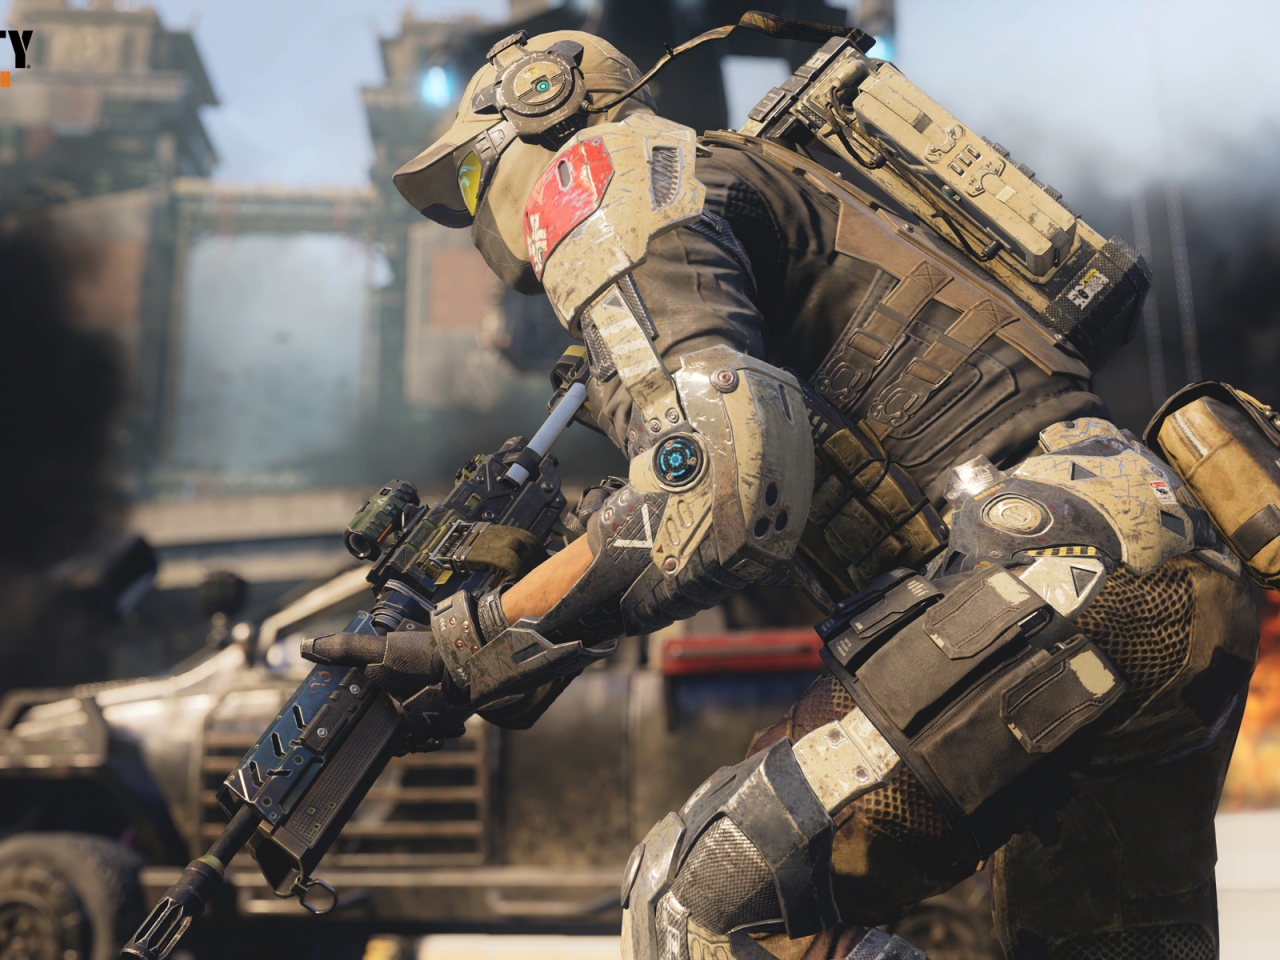 Call of Duty Black Ops III for 1280 x 960 resolution